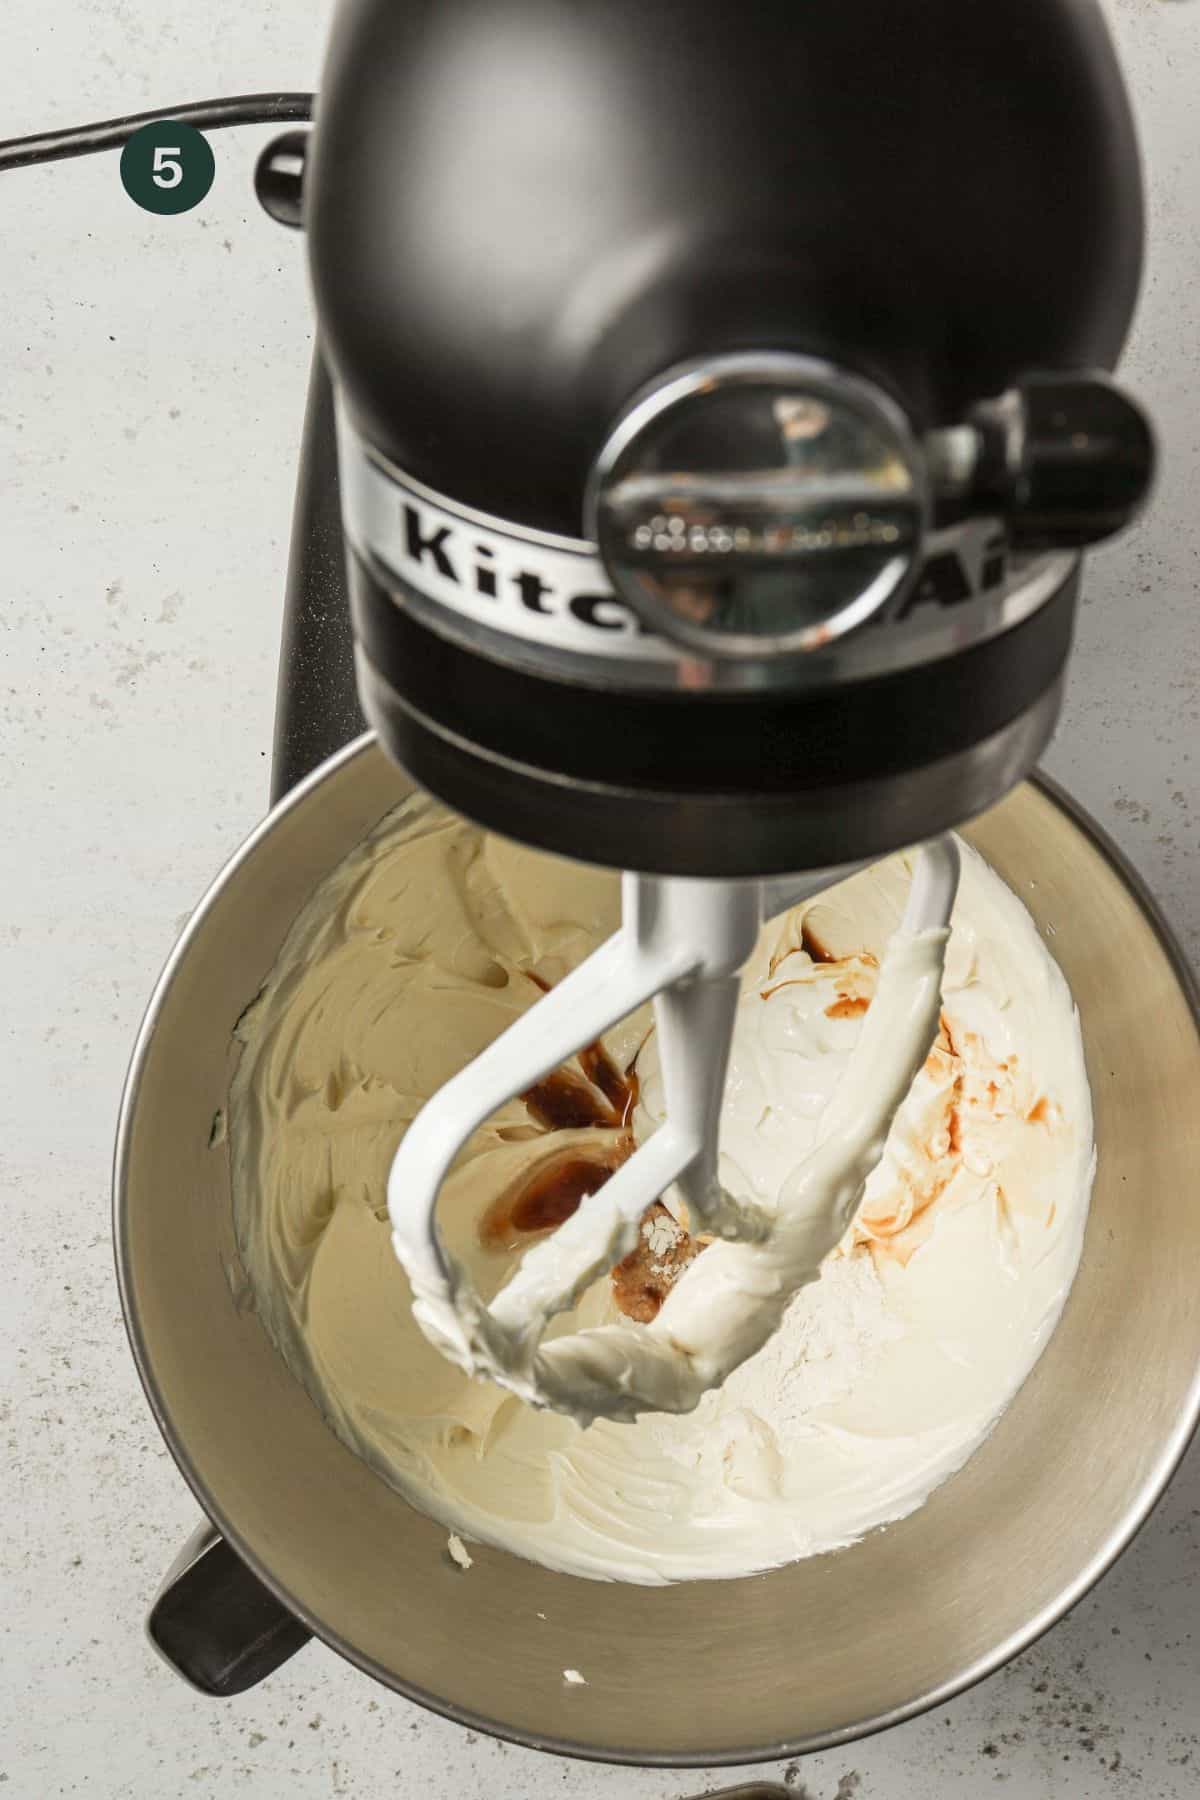 Extracts, flour and greek yogurt added to the mixer.